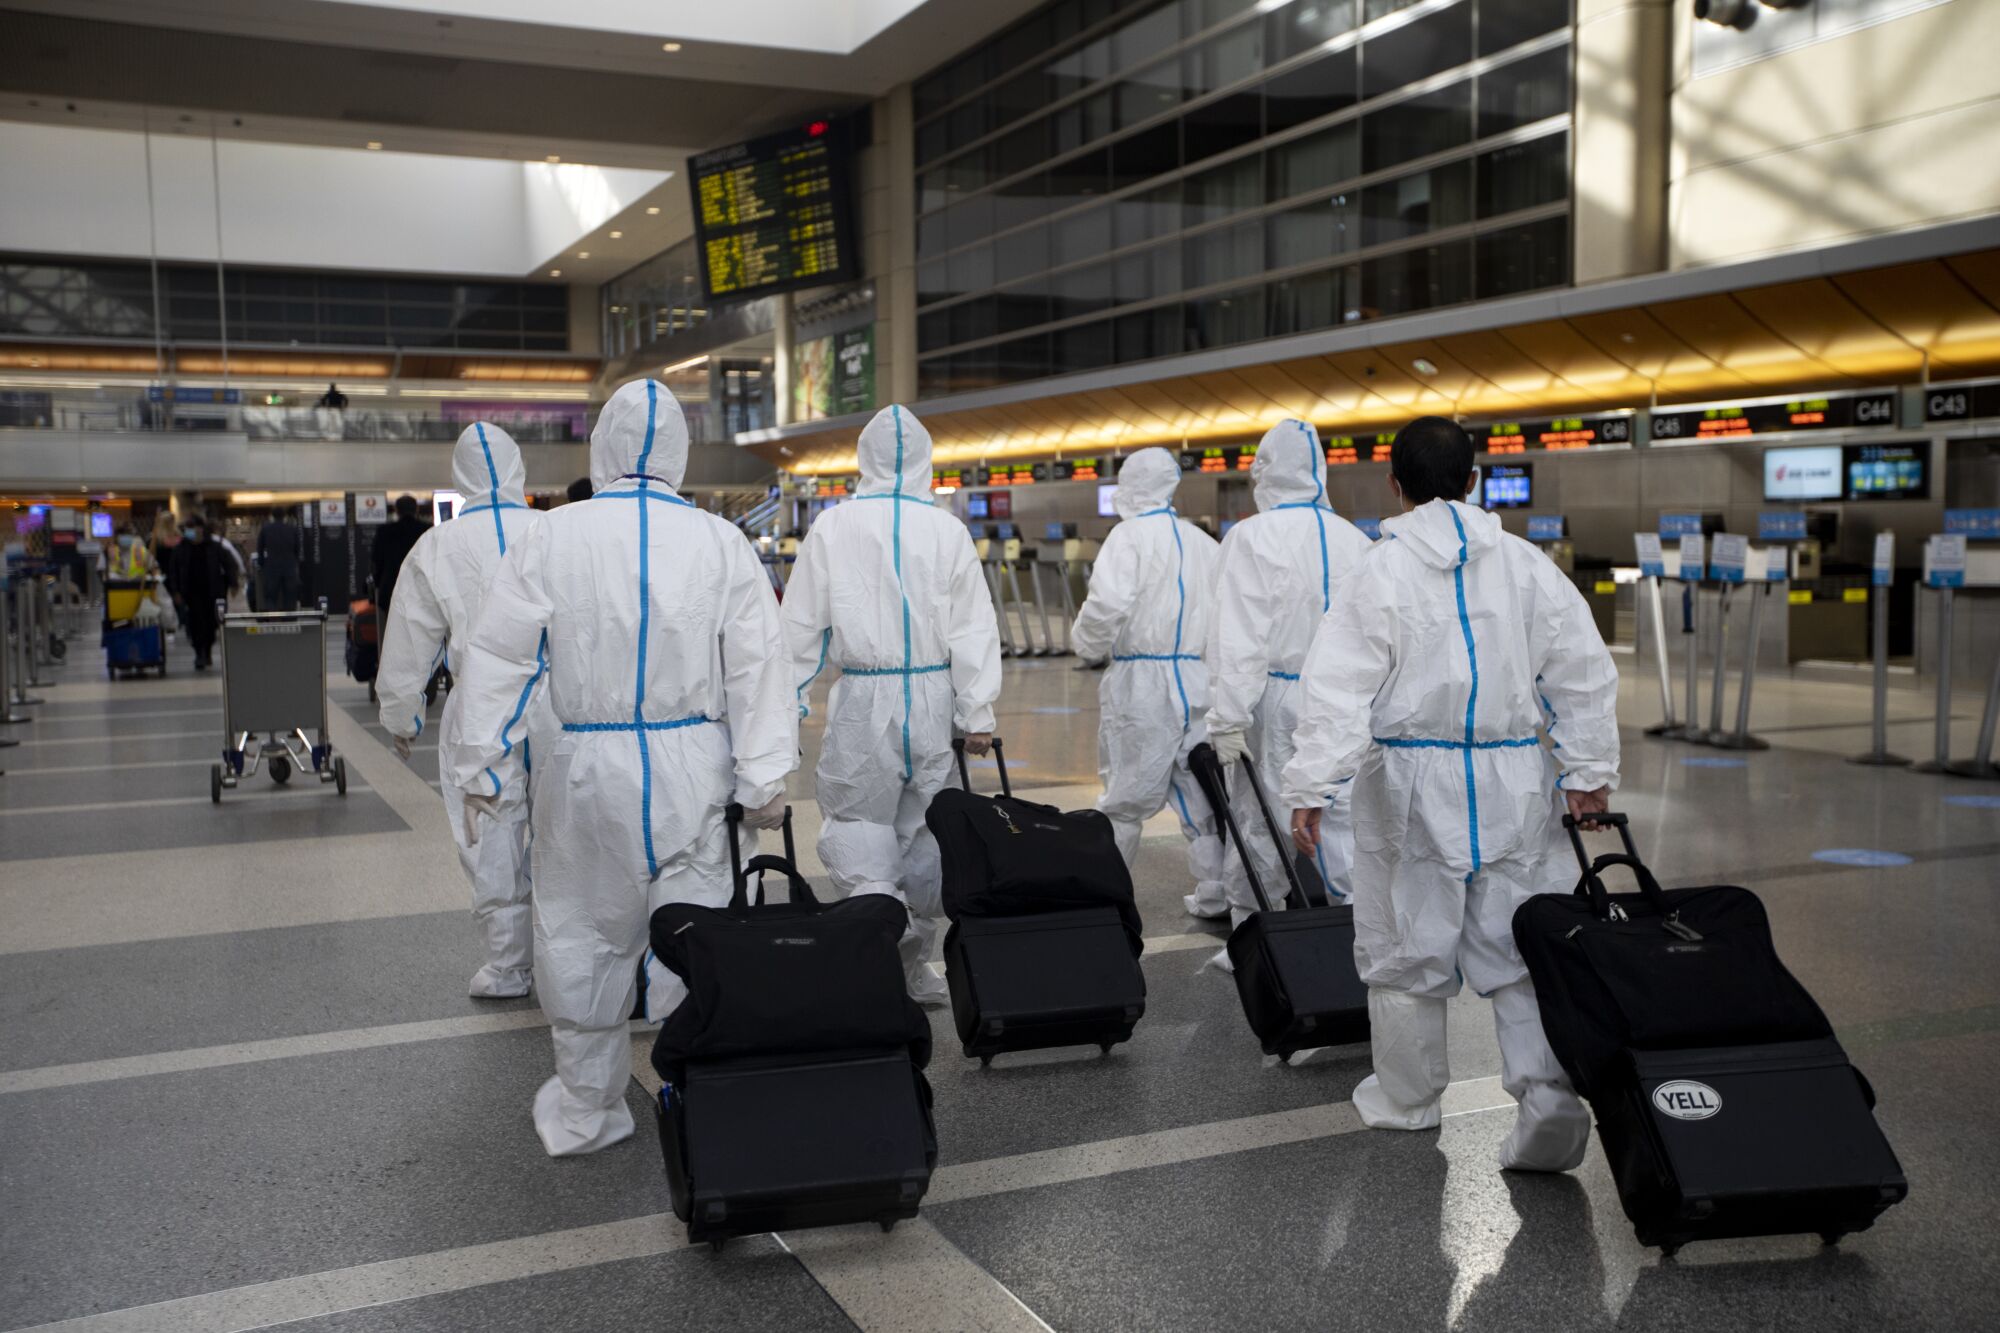 A group wearing personal protective equipment walks through the Tom Bradley International terminal at LAX.